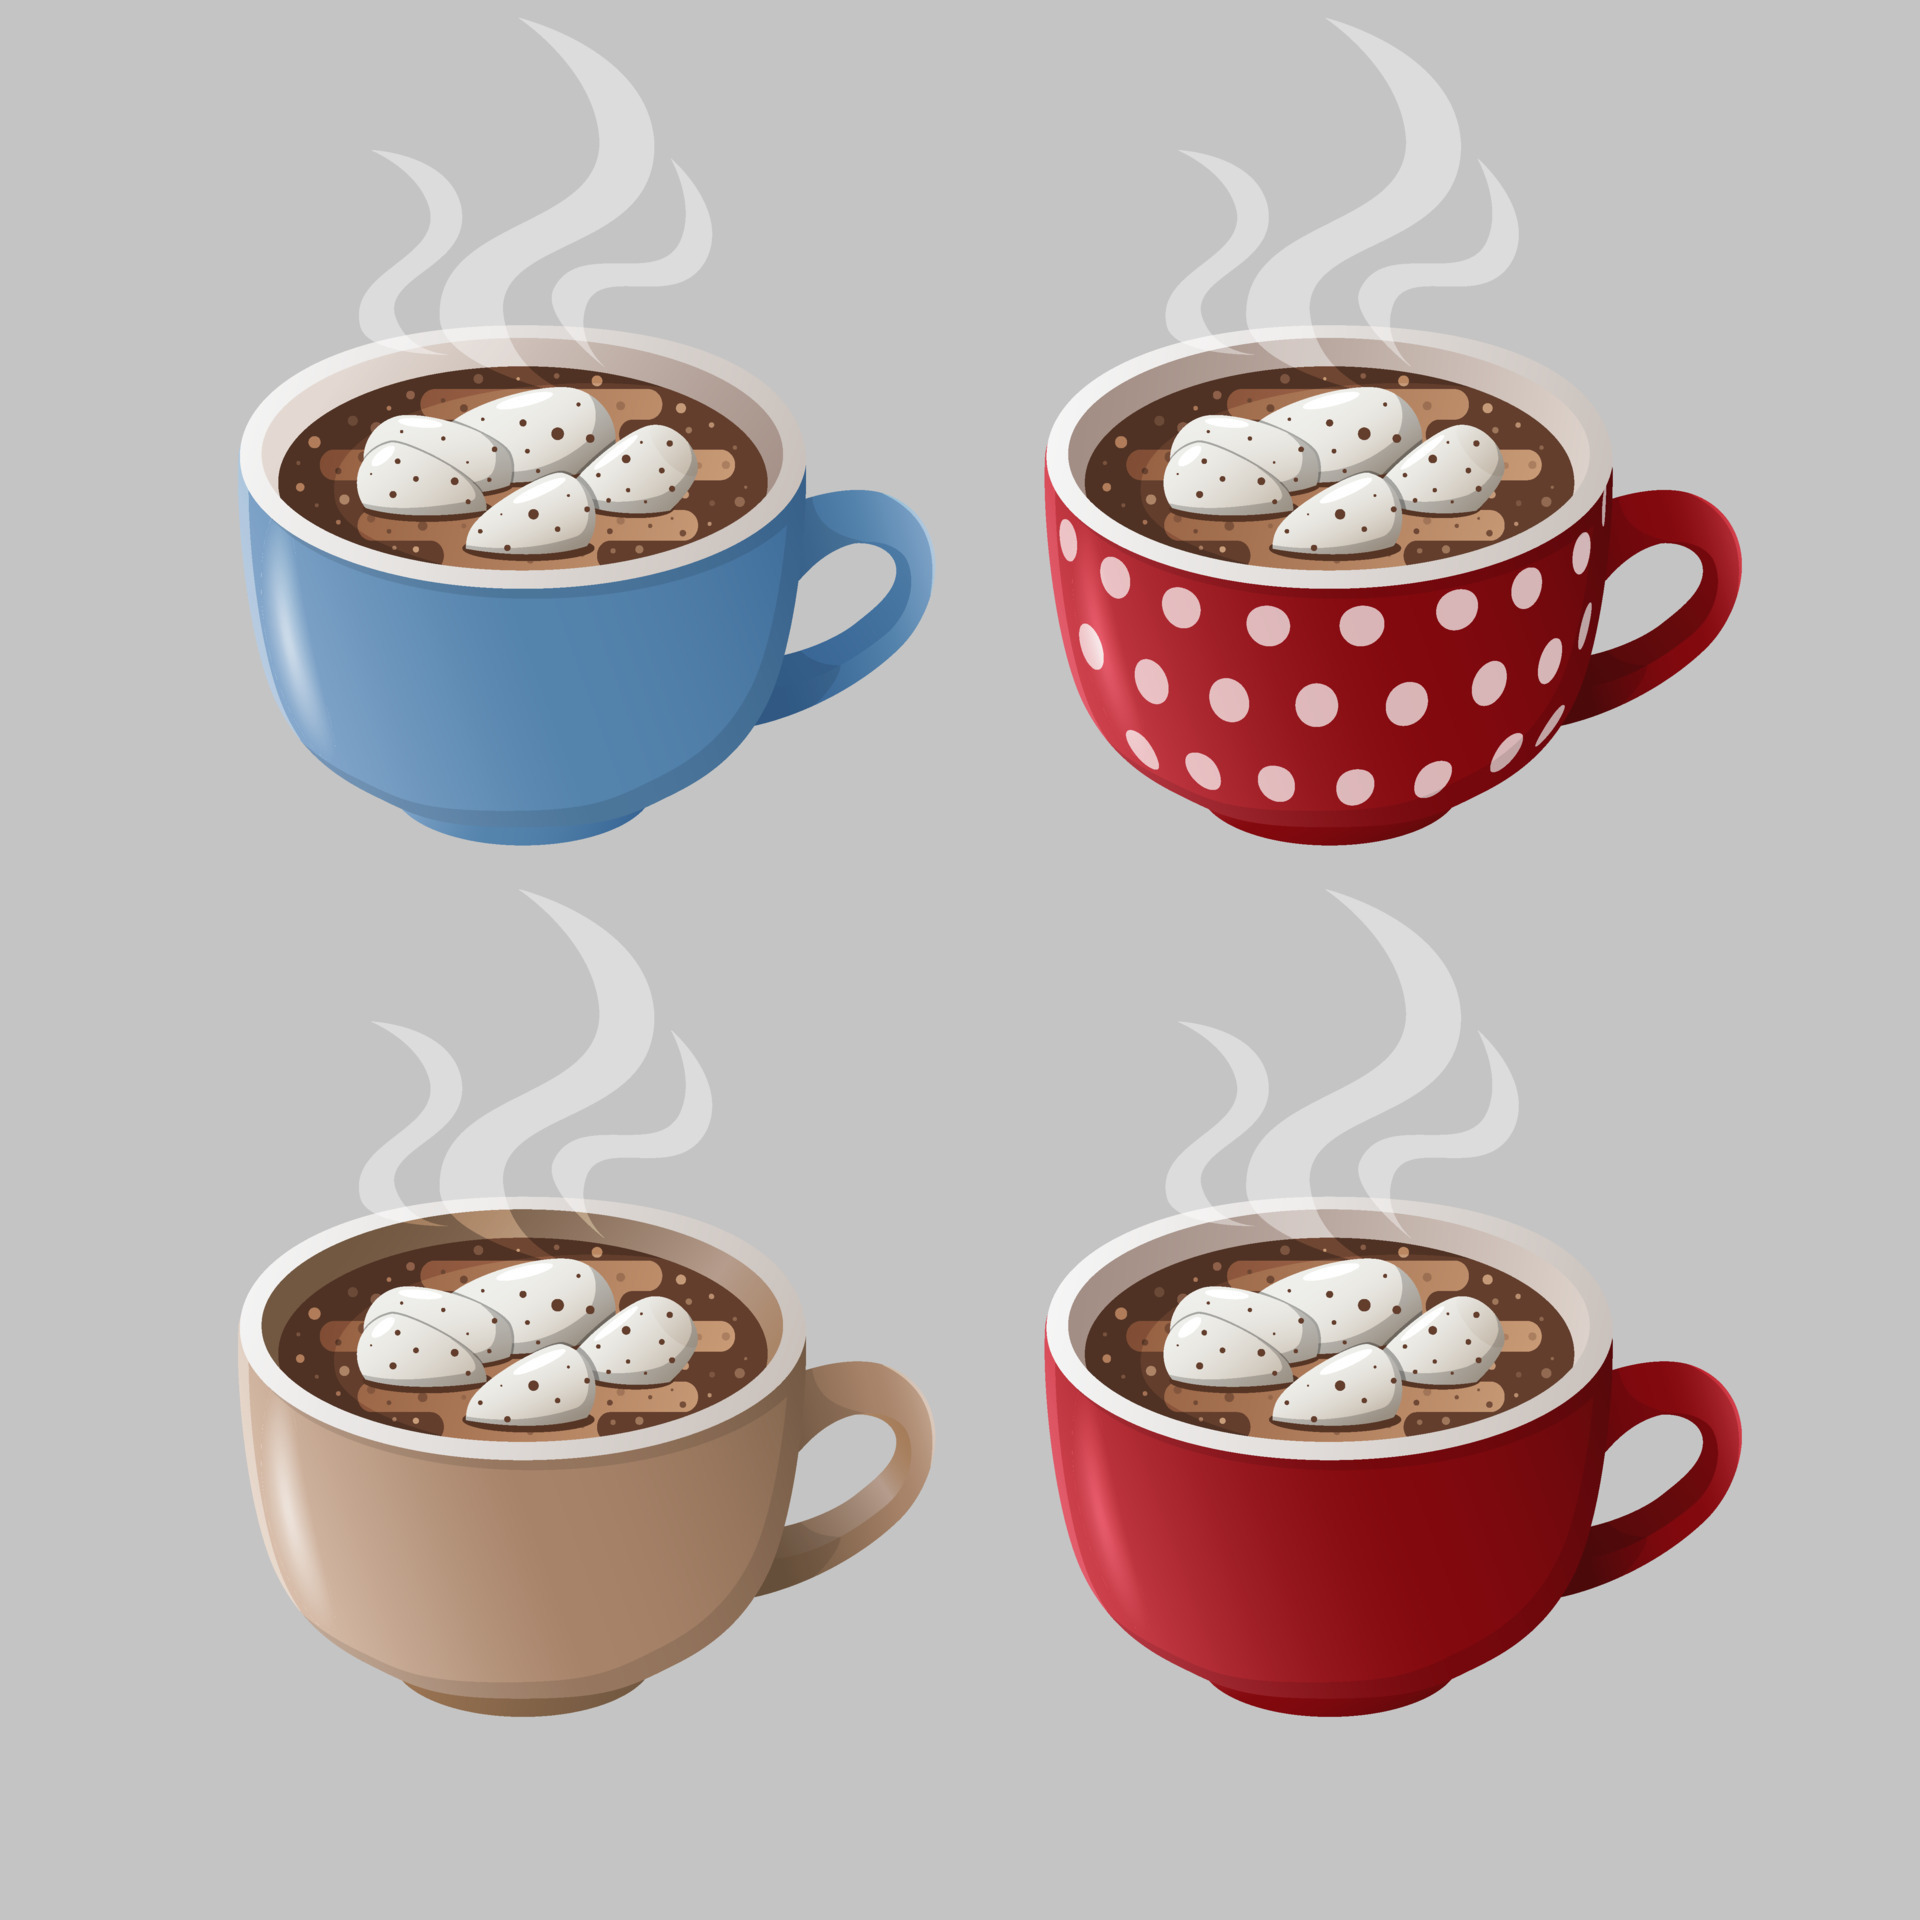 Set With Hot Drinks In Paper Cups To Take Away Coffee Tea Bags And Cocoa  With Marshmallow Stock Illustration - Download Image Now - iStock